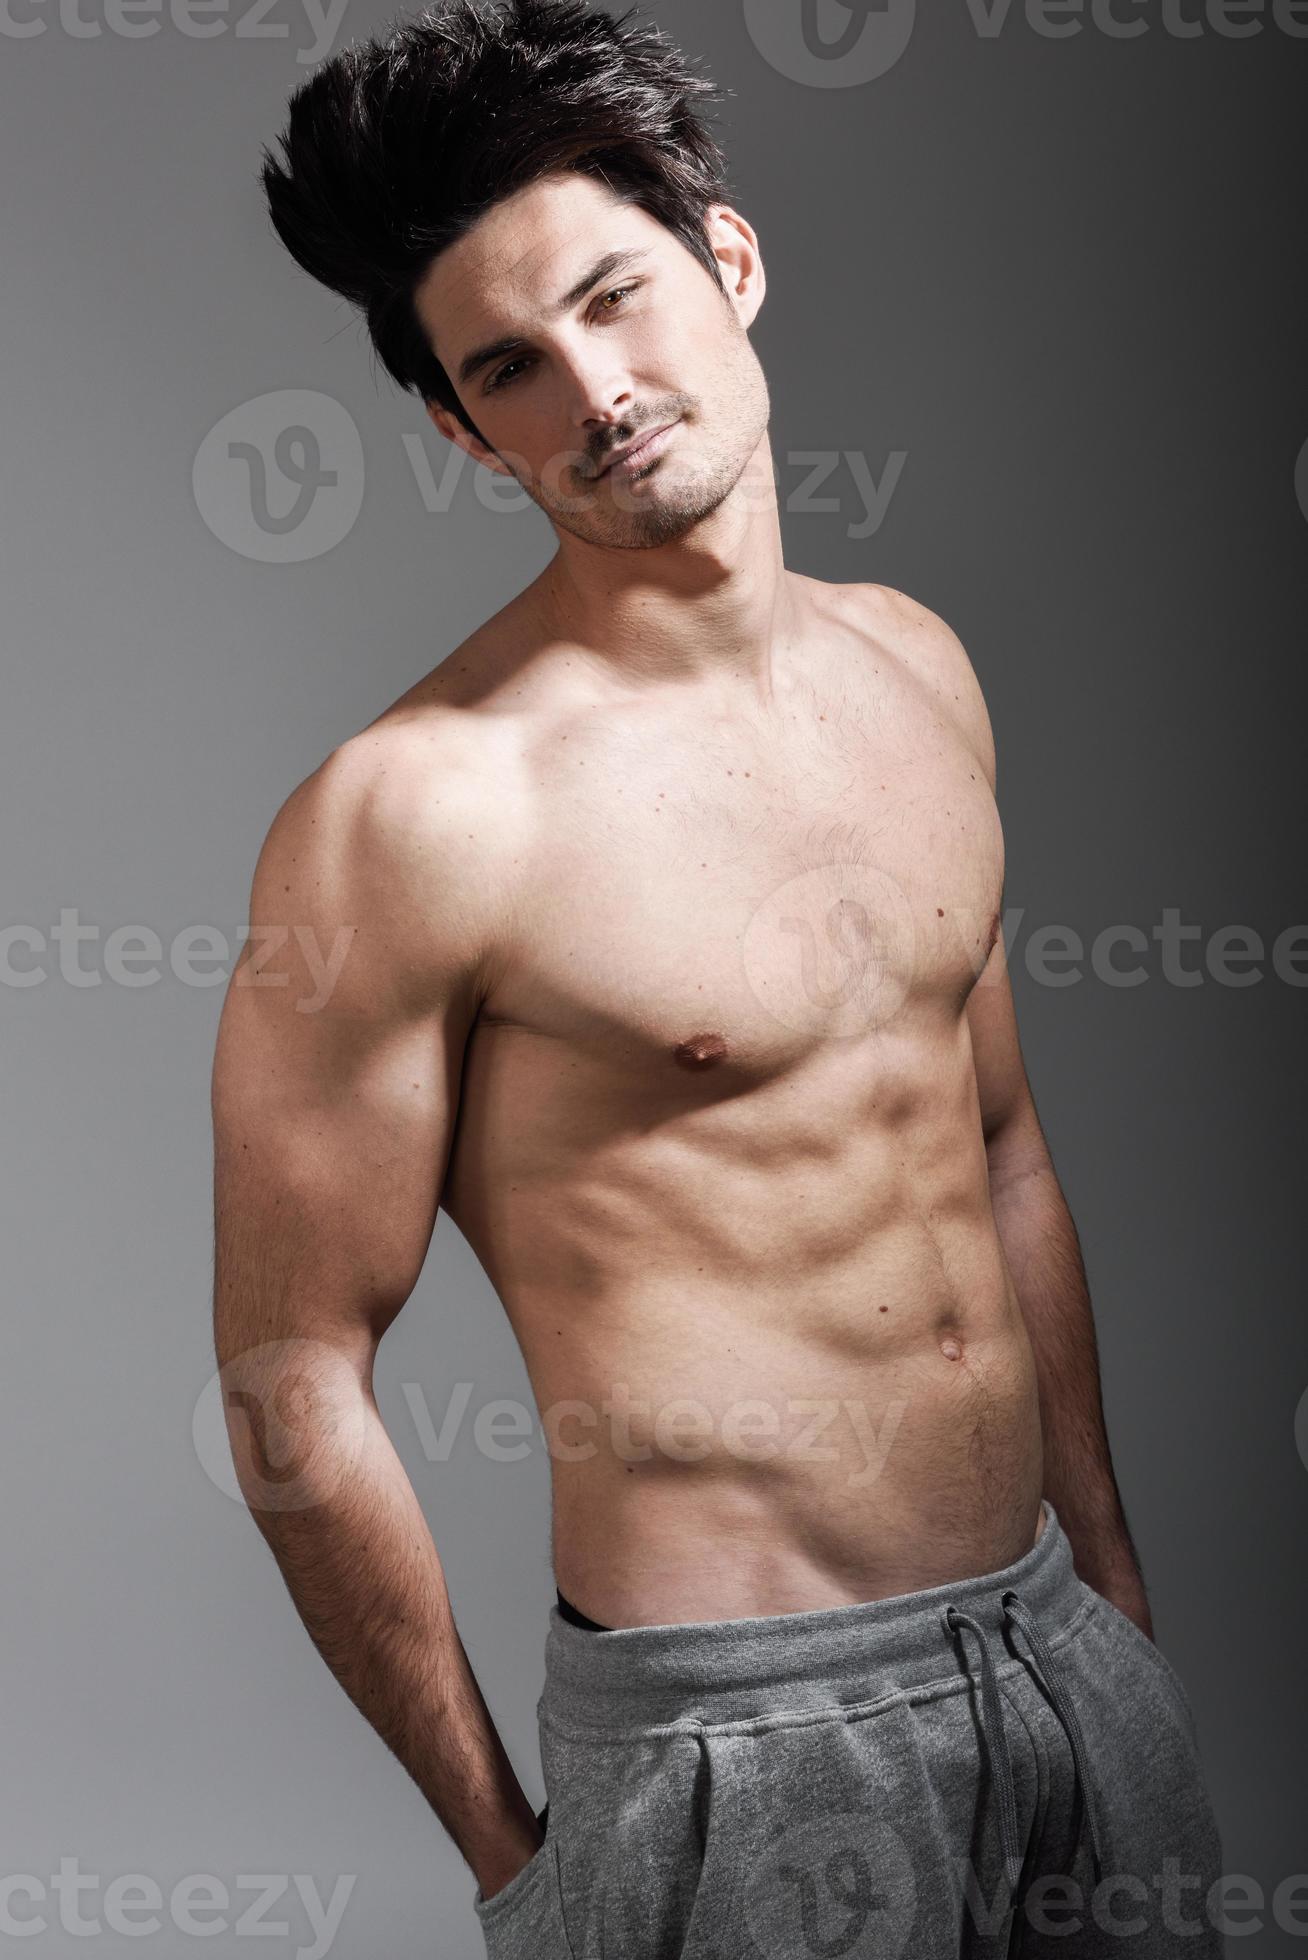 Half naked sexy body of muscular athletic man 6521079 Stock Photo